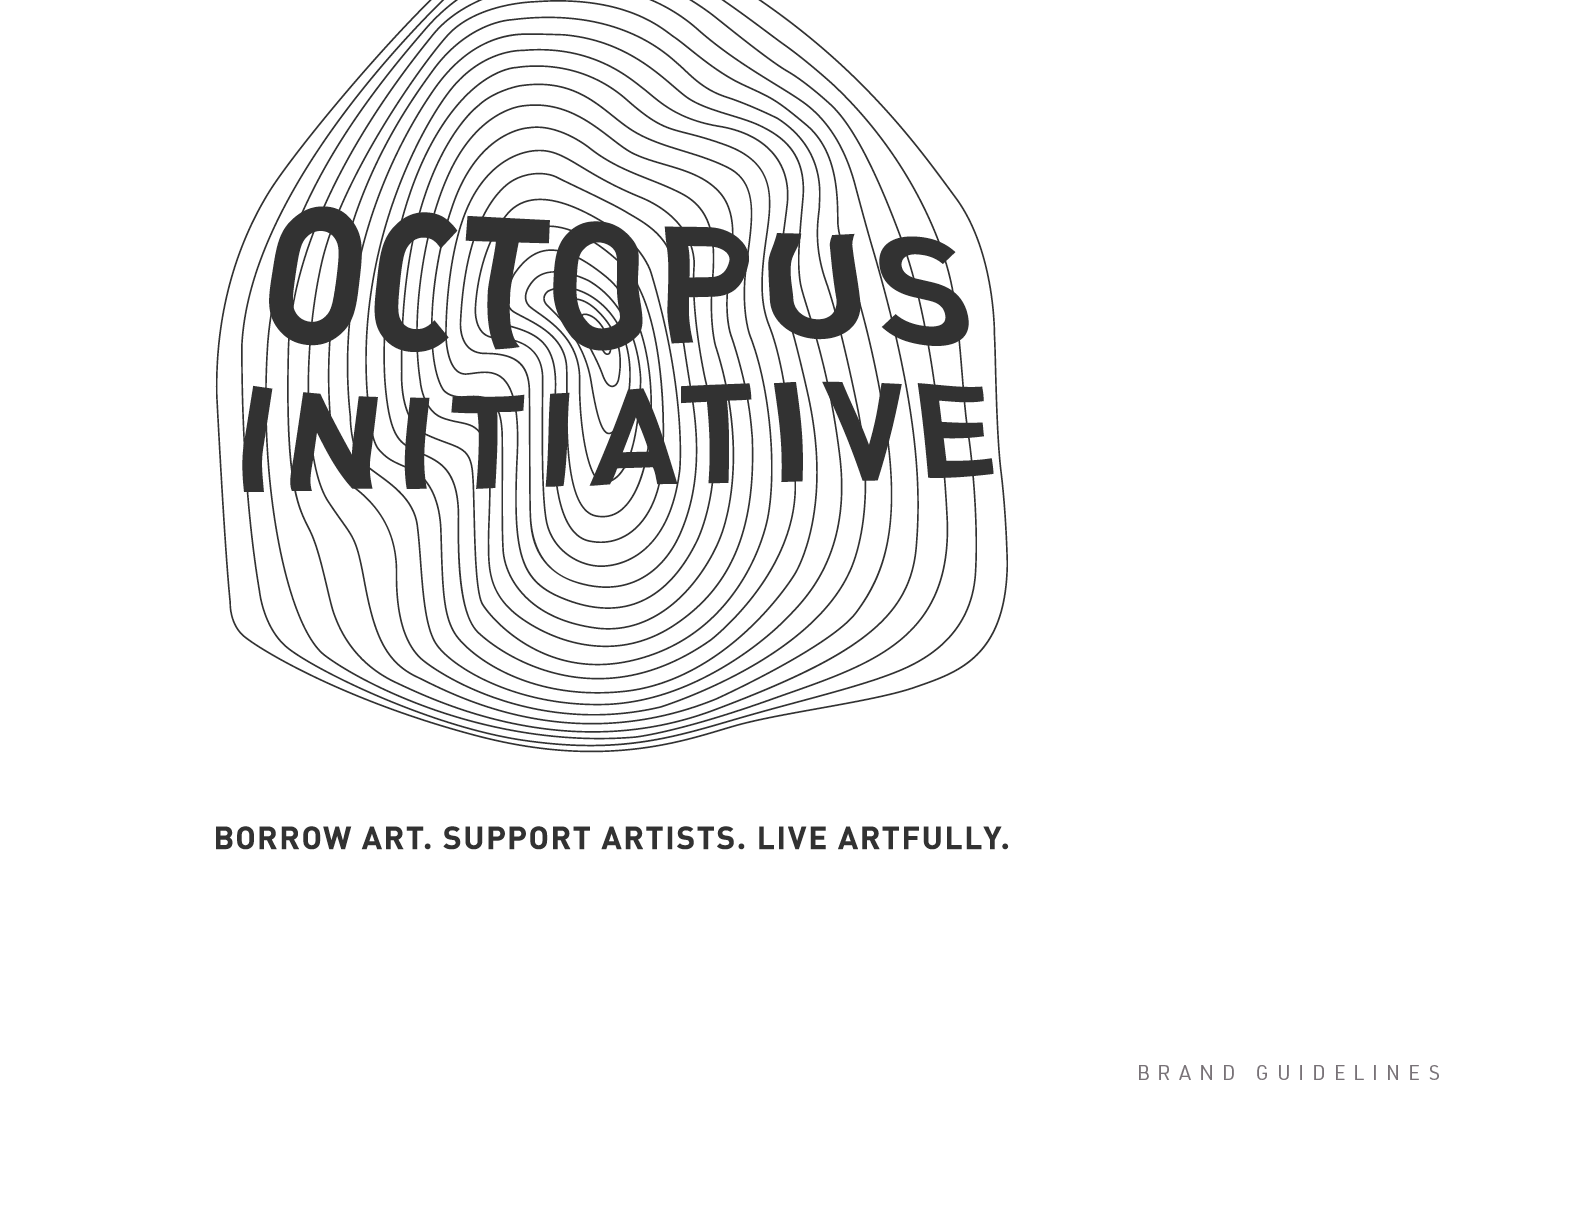 The Octopus Initiative Brand Guidelines - Page 1